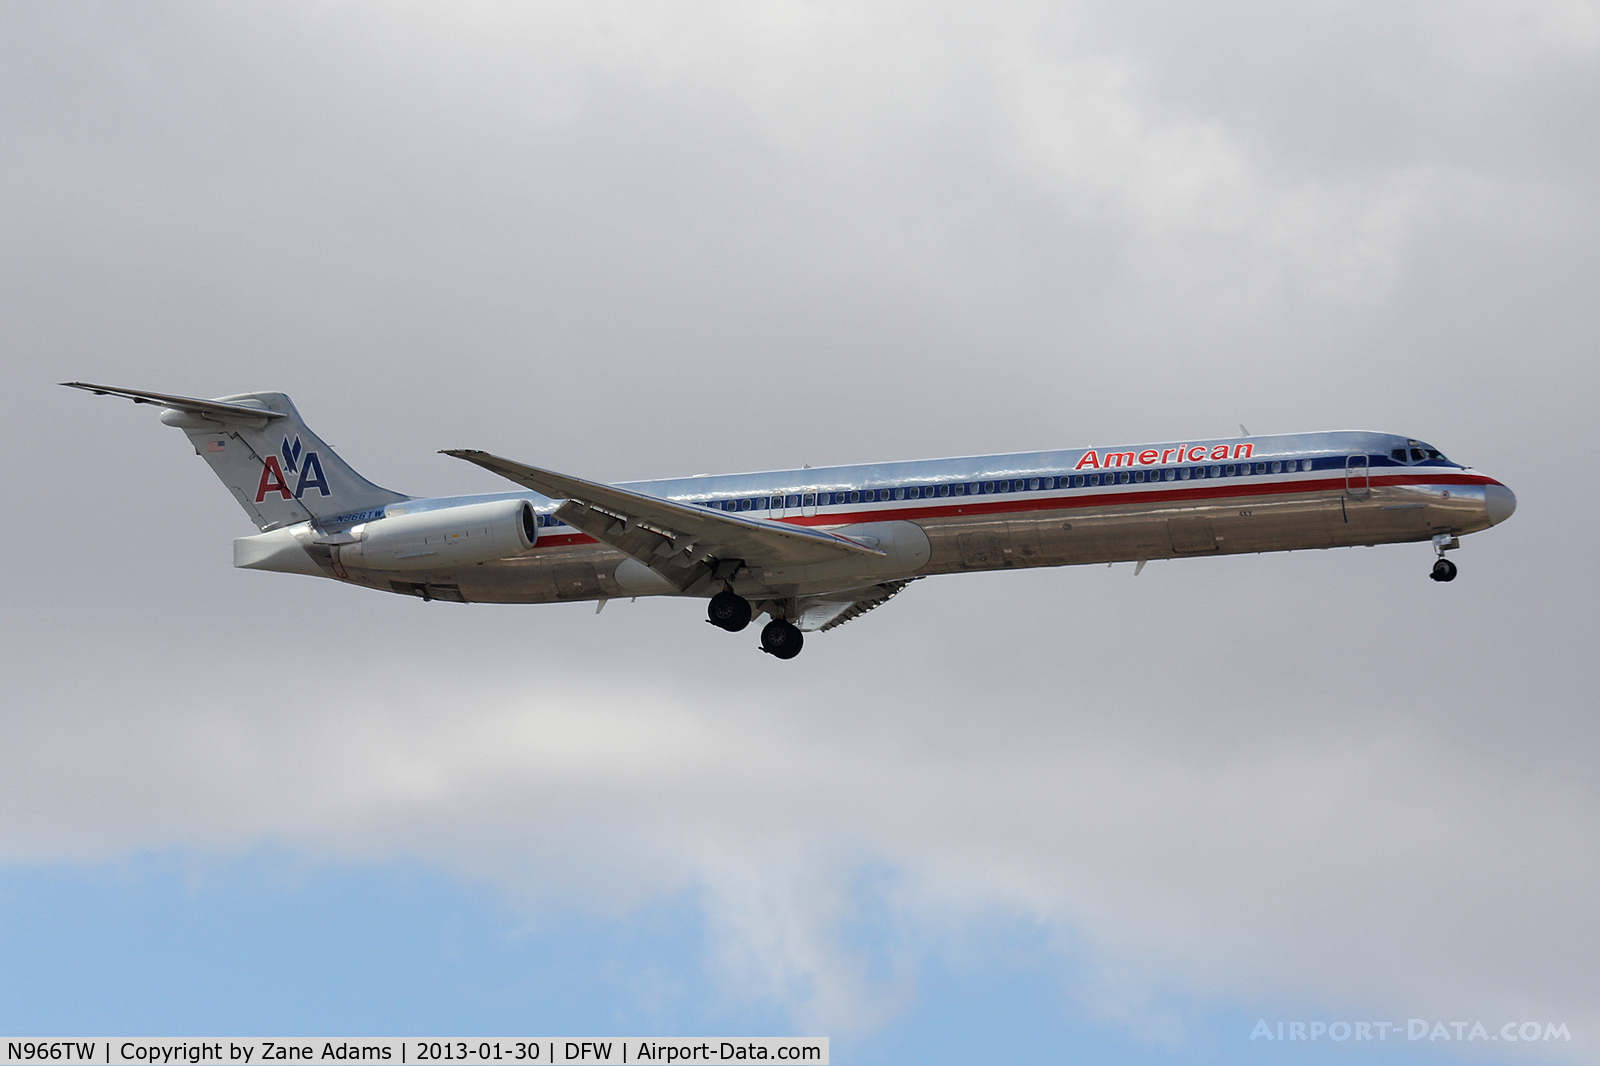 N966TW, 1999 McDonnell Douglas MD-83 (DC-9-83) C/N 53616, American Airlines landing at DFW Airport